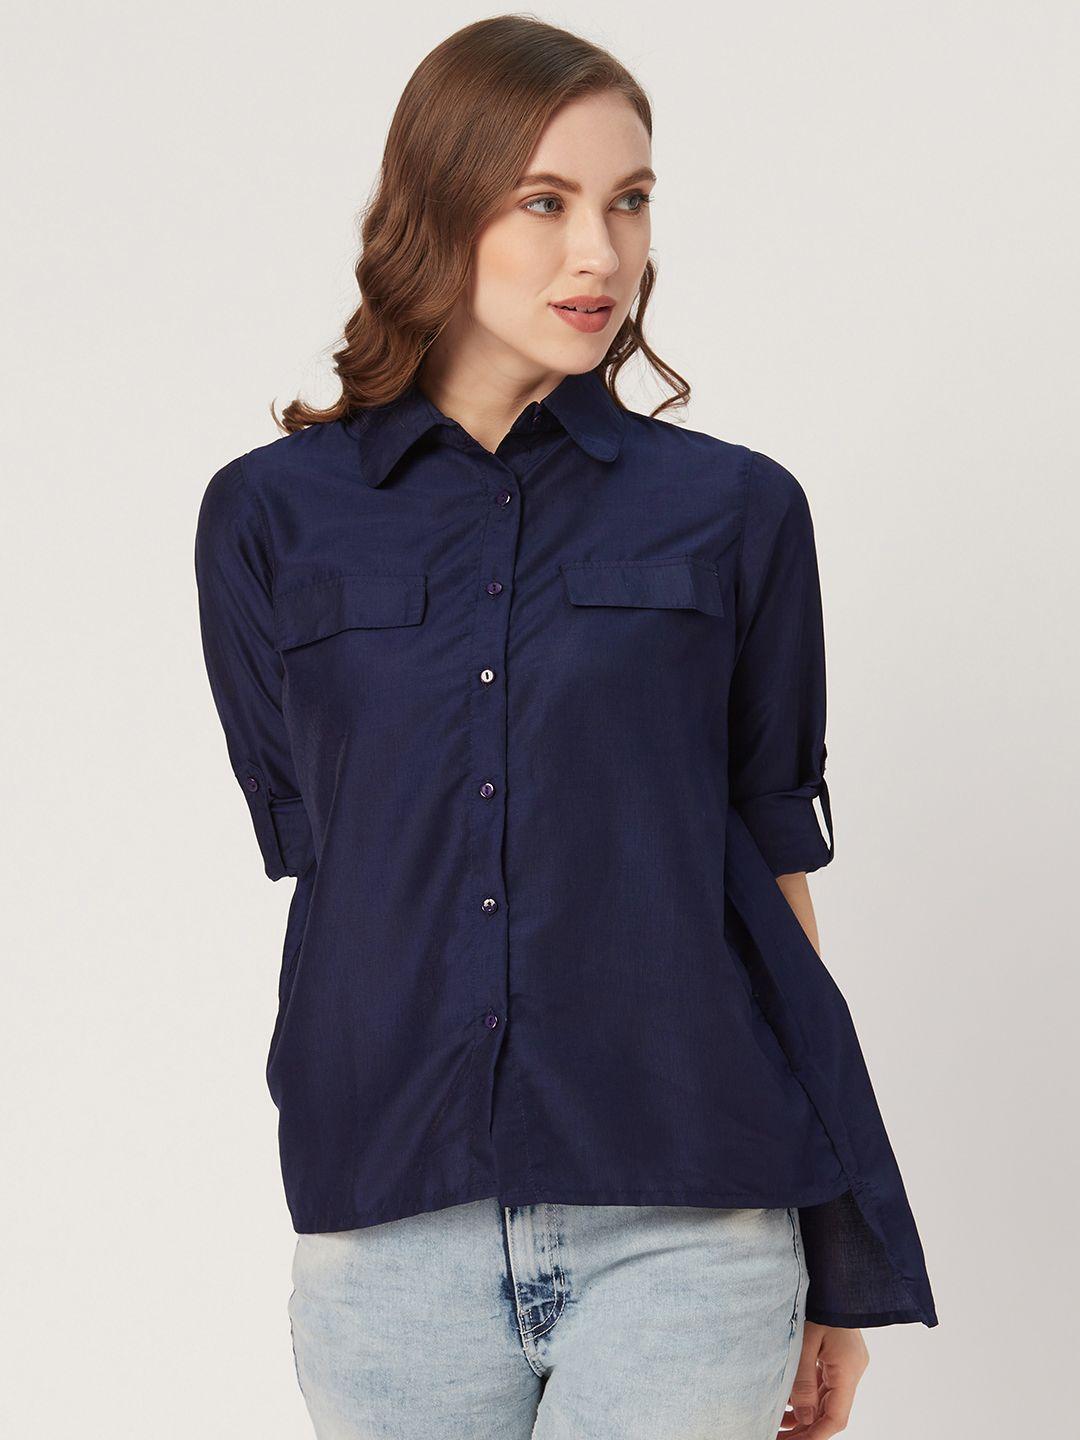 style-quotient-women-navy-blue-classic-regular-fit-solid-casual-shirt